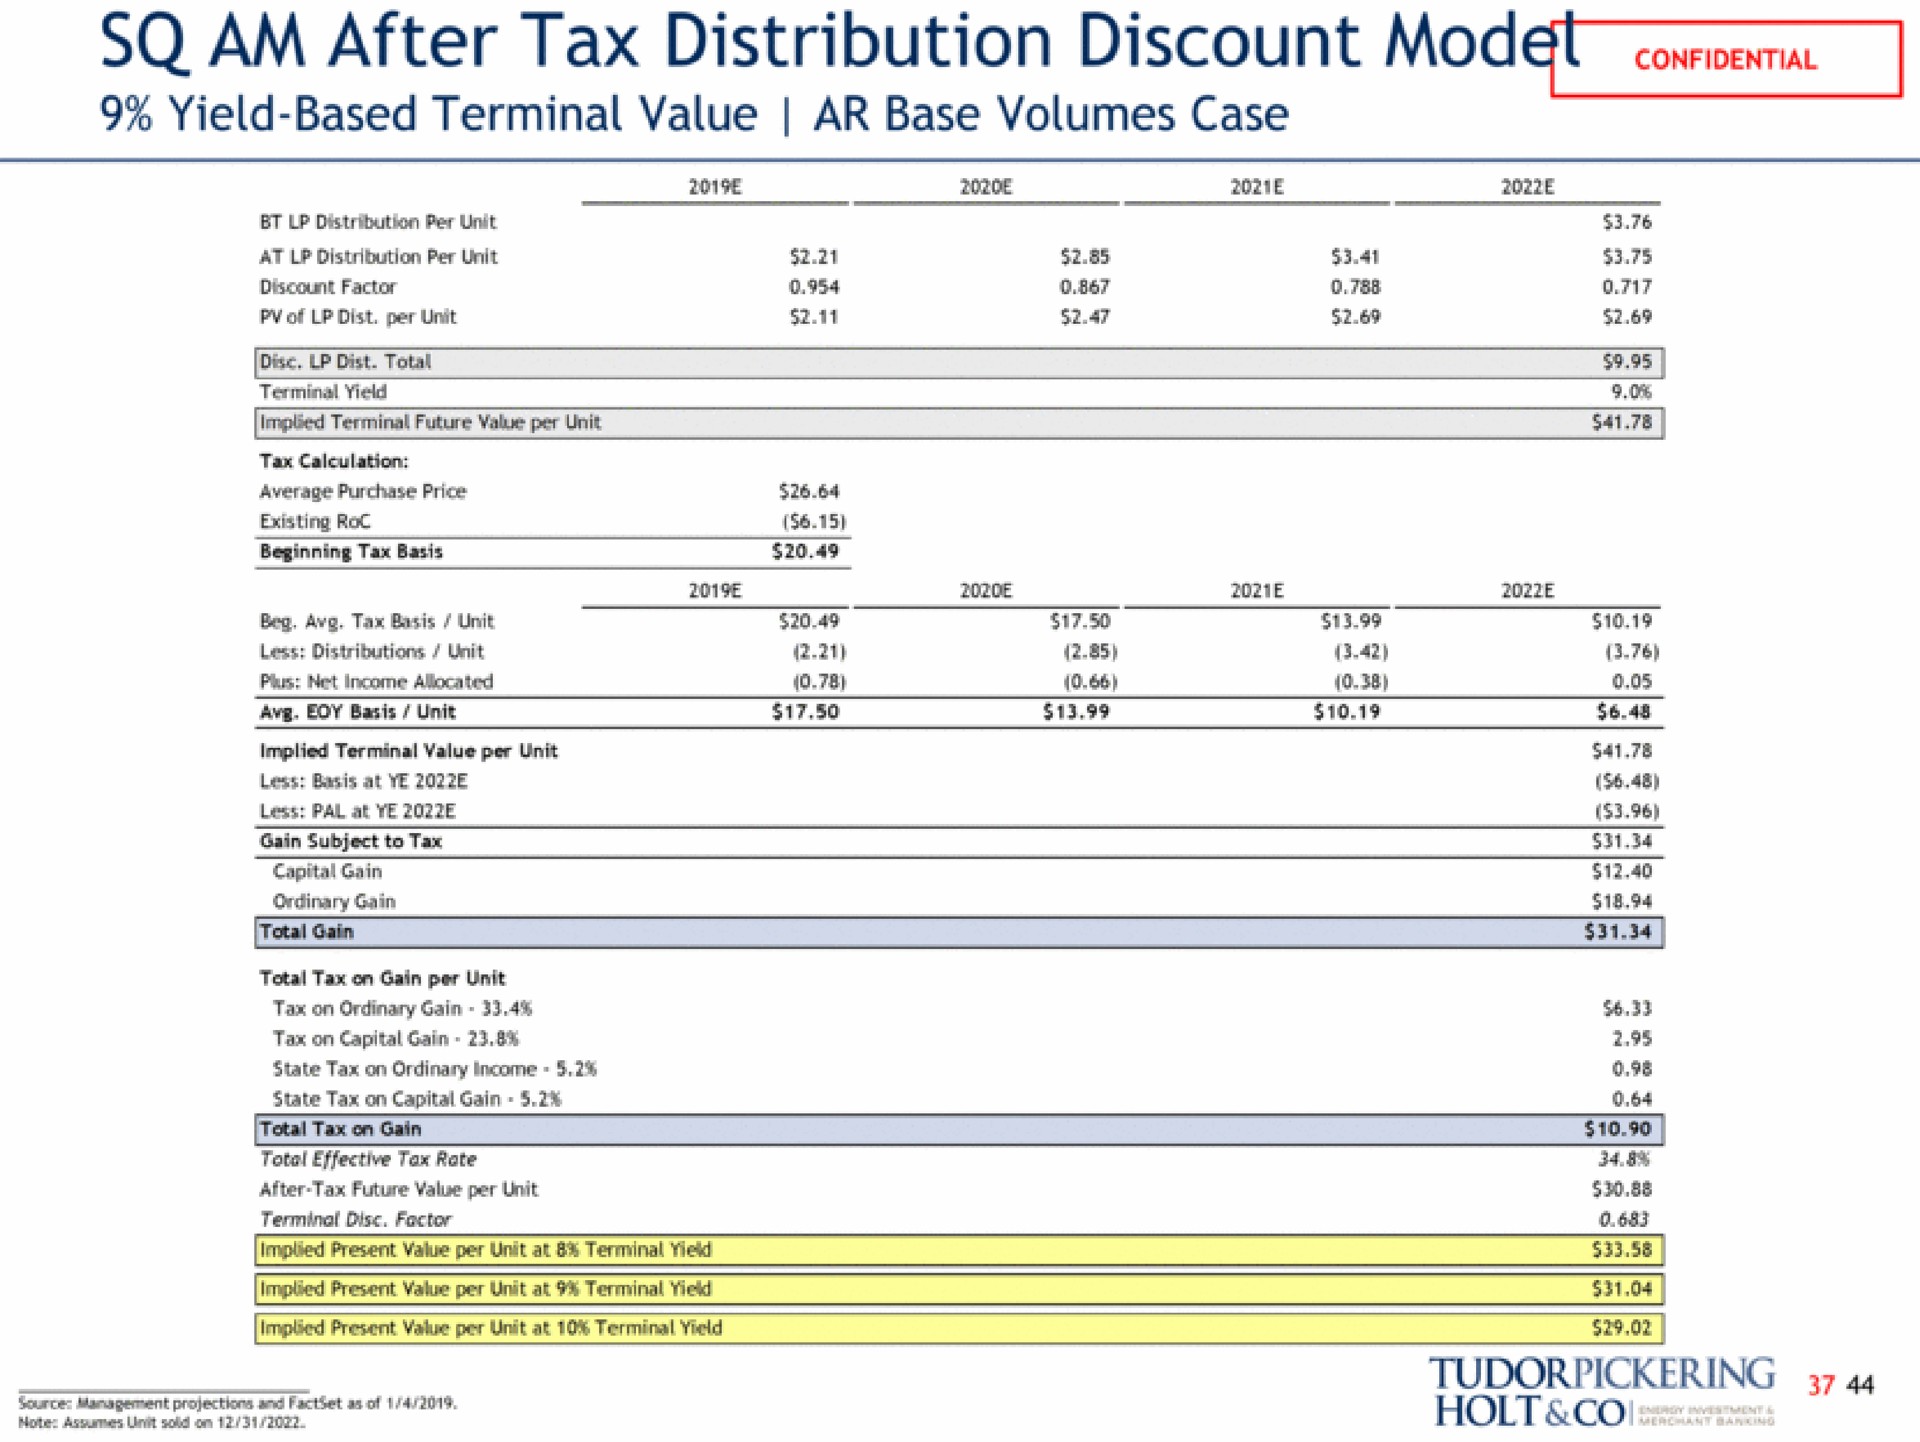 am after tax distribution discount yield based terminal value base volumes case note saa on dine holt | Tudor, Pickering, Holt & Co